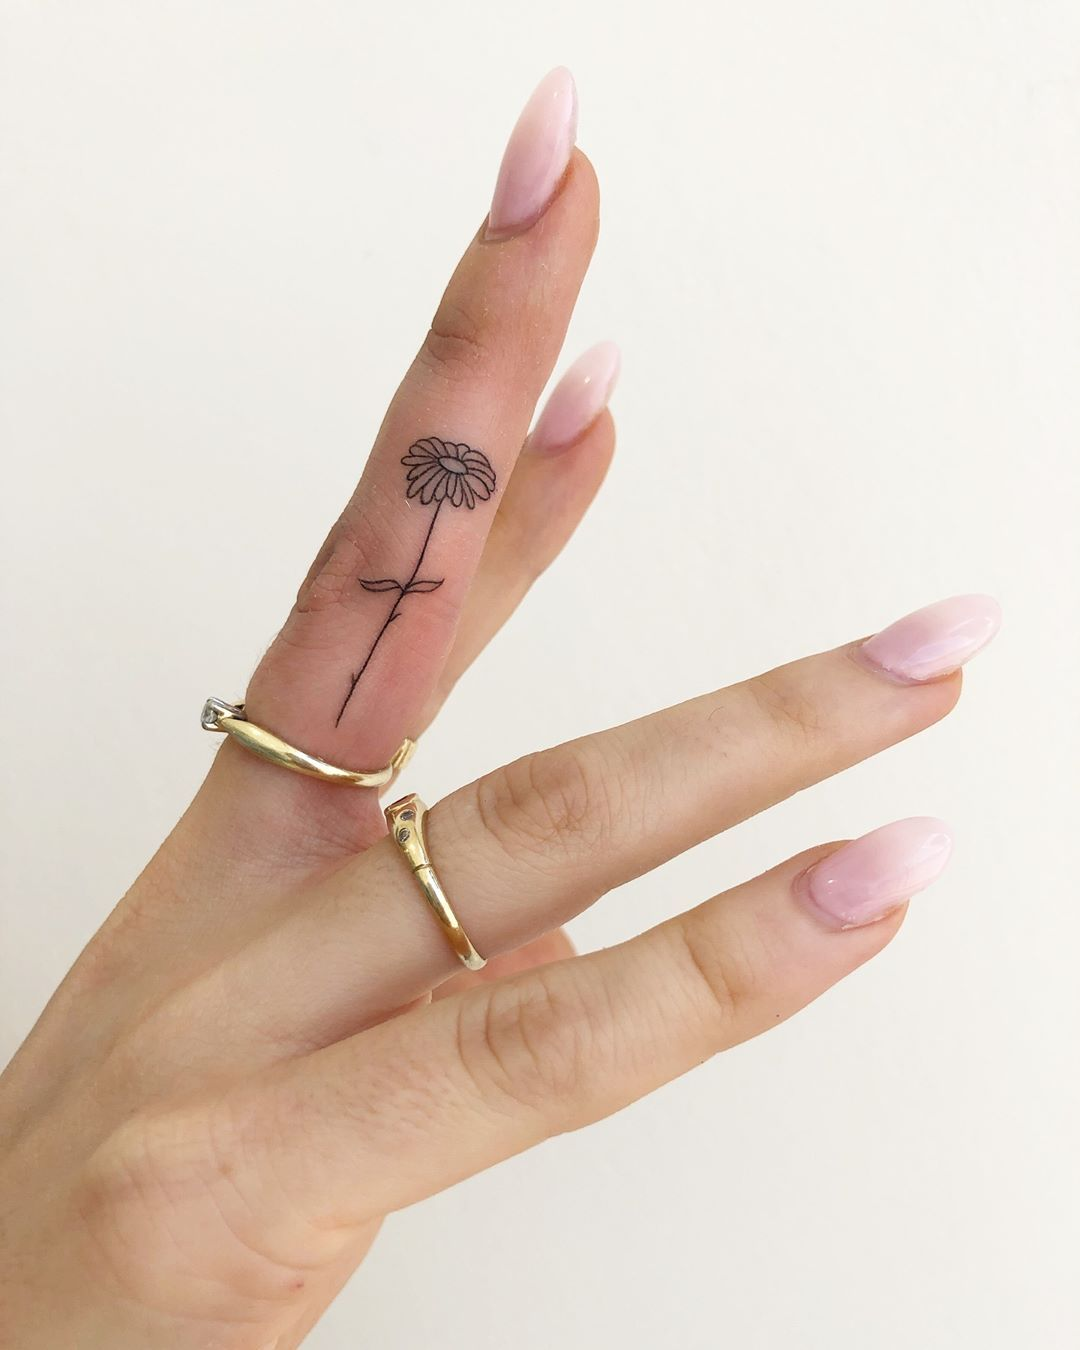 Tattoo uploaded by Tattoodo  Finger flowers tattoo by Olga Handpoke  olgahandpoke handpoketattoos color flower floral finger matching  cute daisy daisies leaves nature nonelectric stickandpoke  Tattoodo